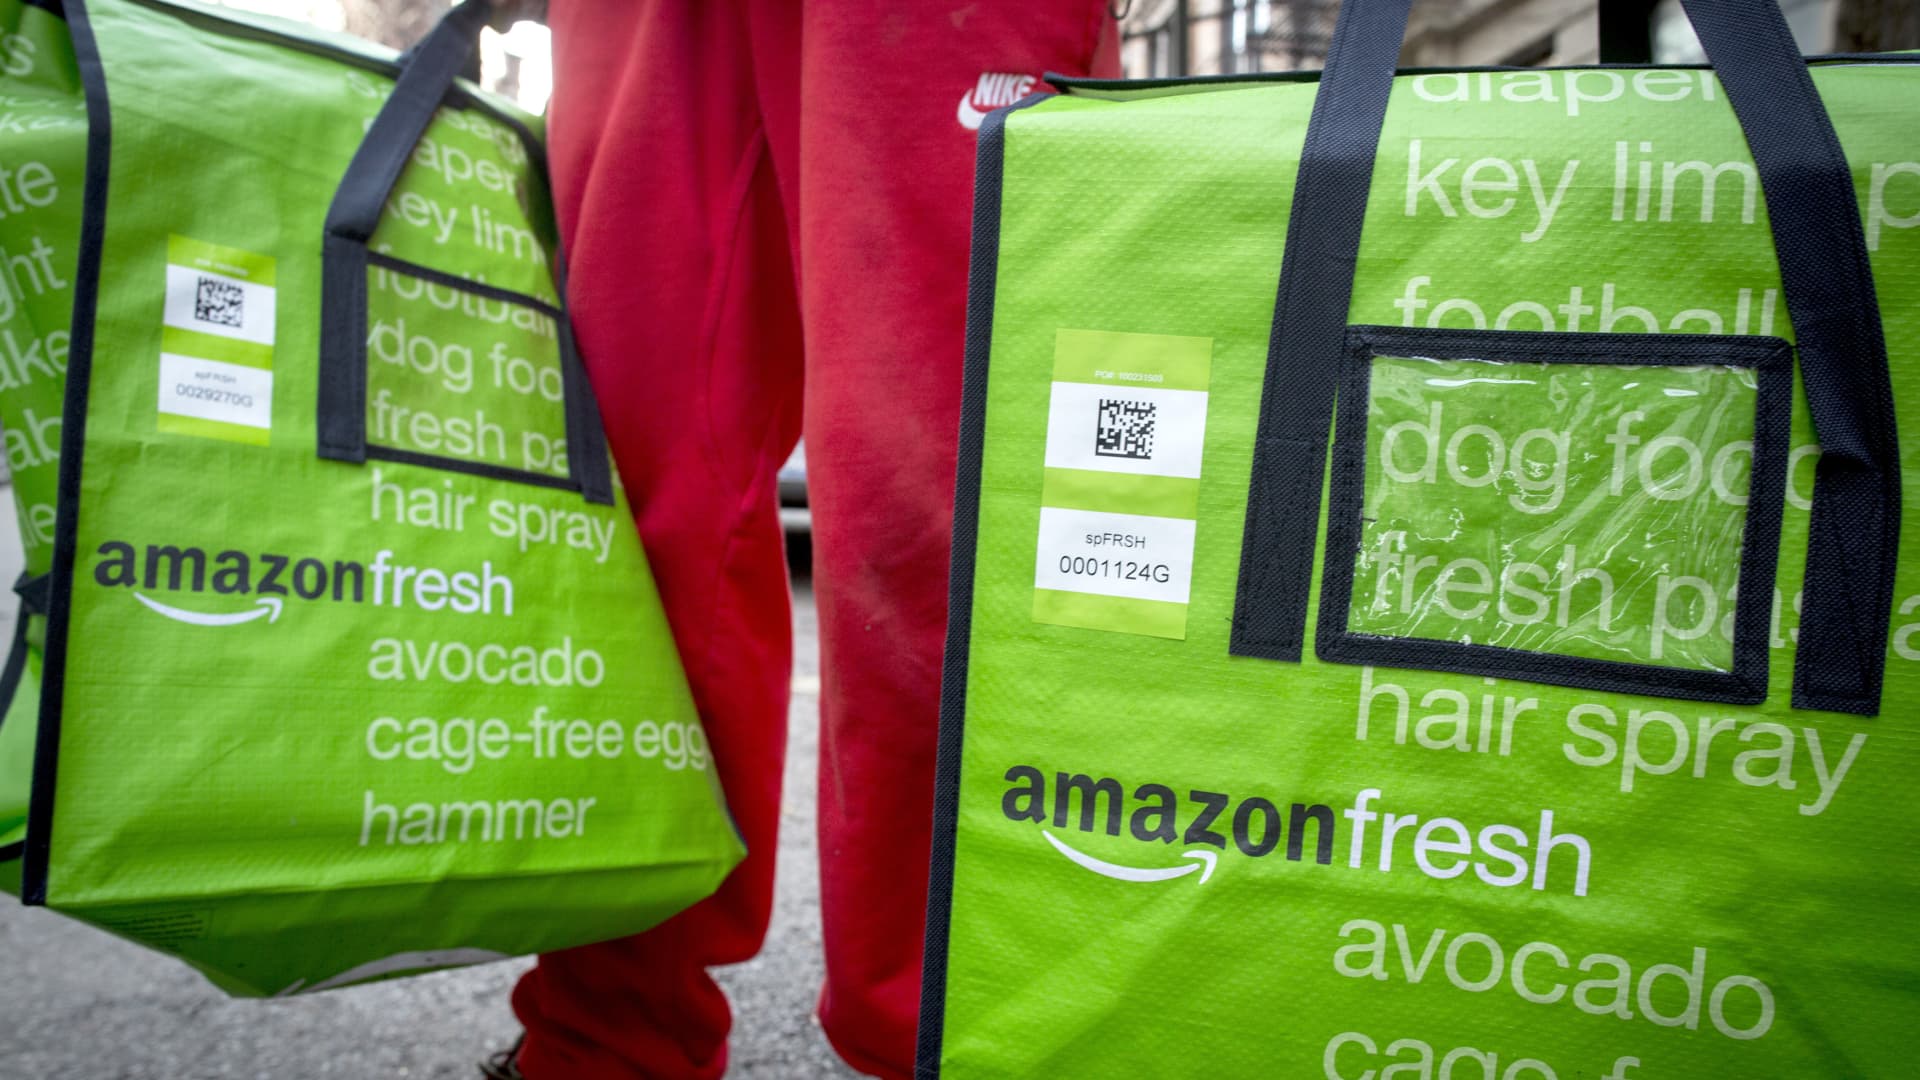 Amazon to charge delivery fees on Fresh grocery orders under $150